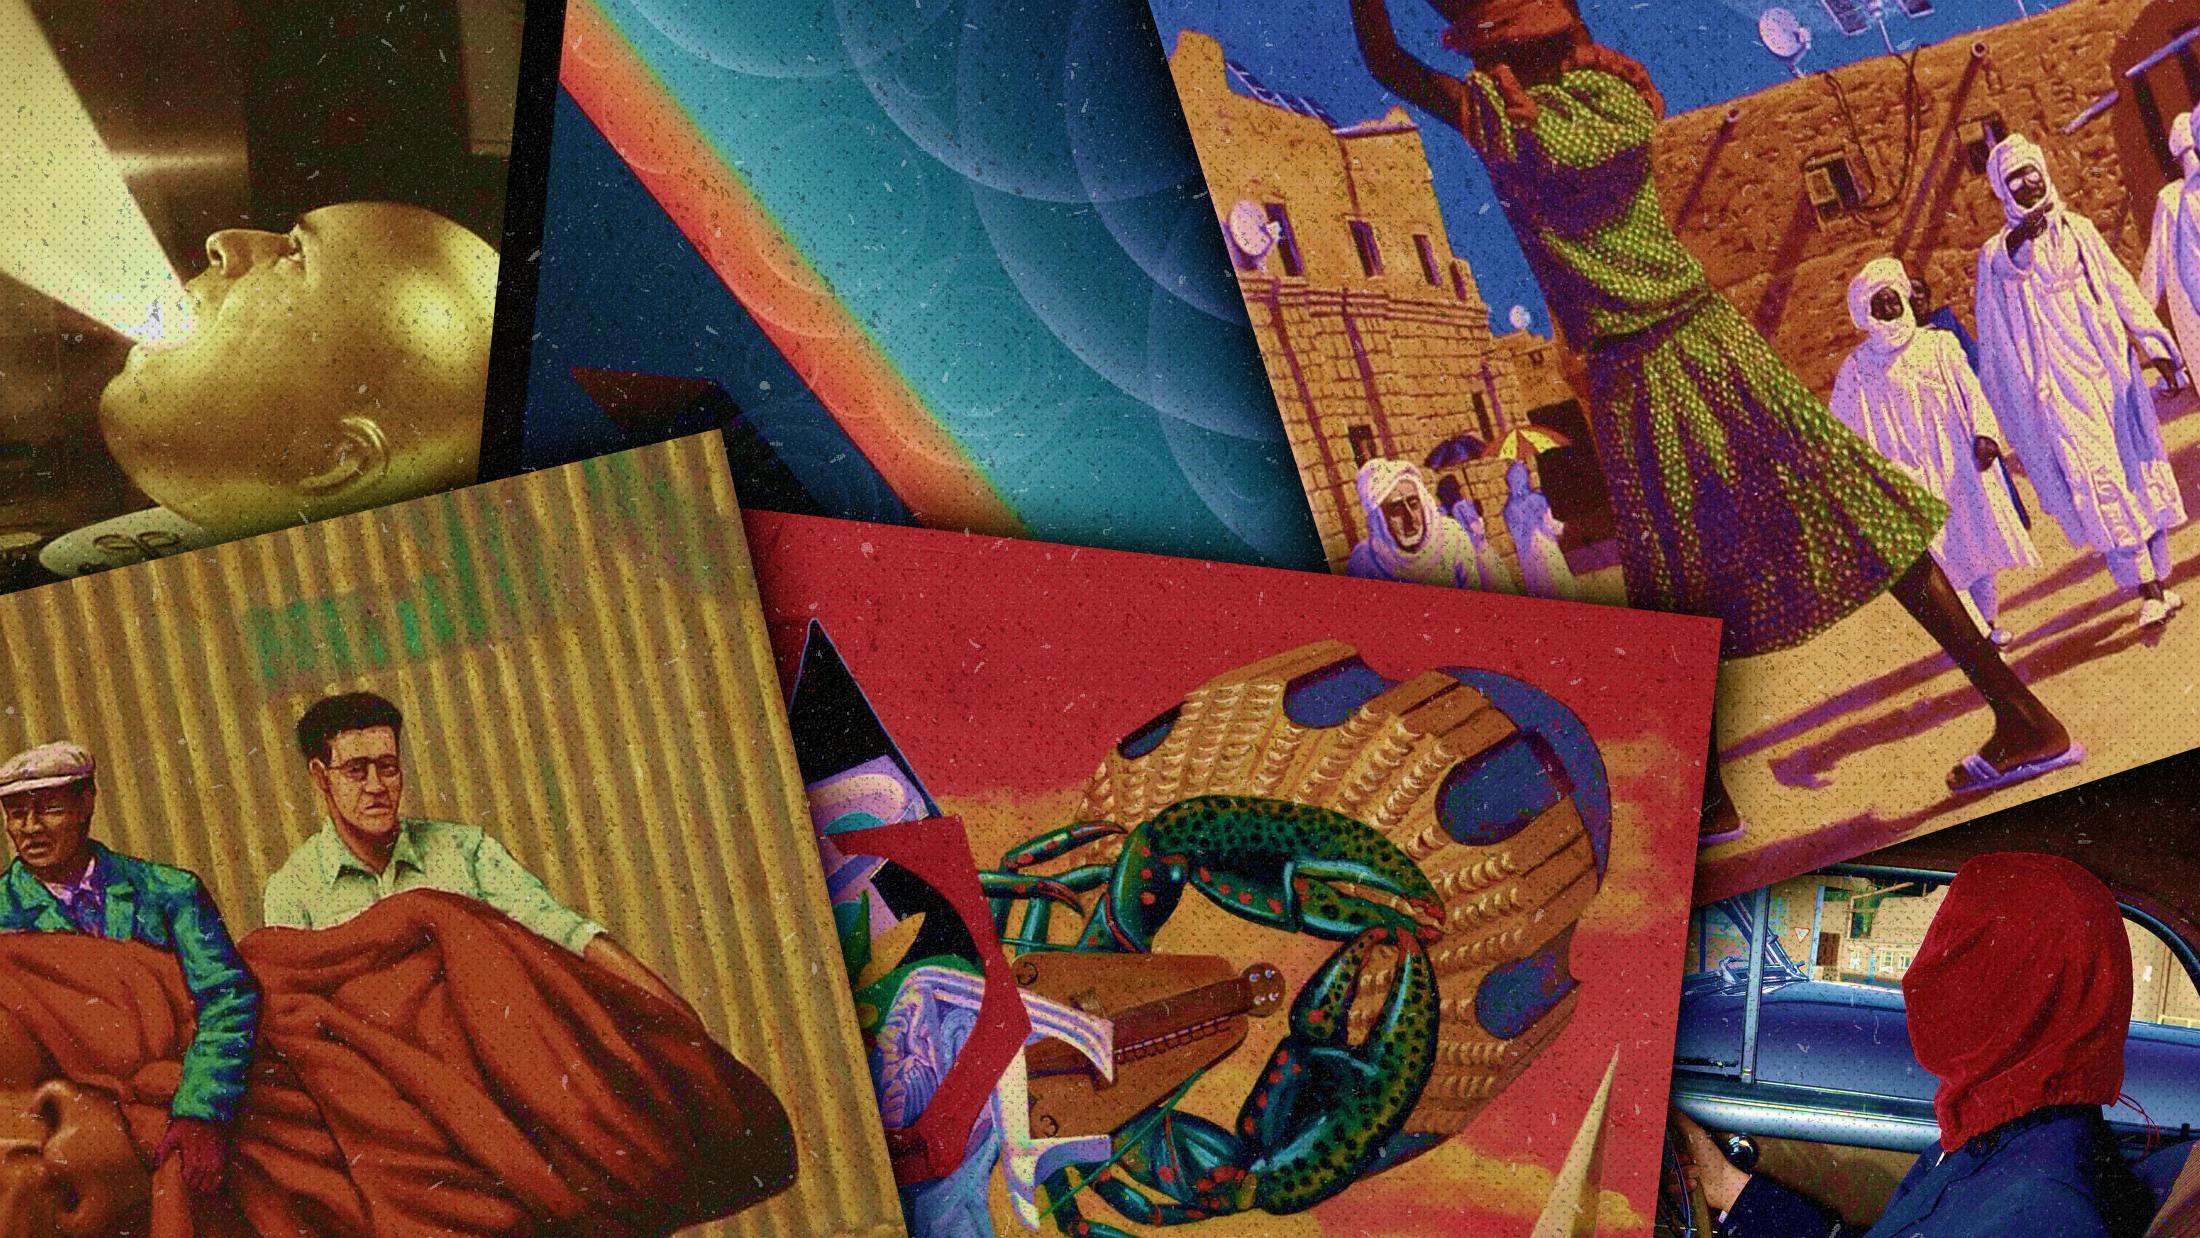 The Mars Volta: Every album ranked from worst to best